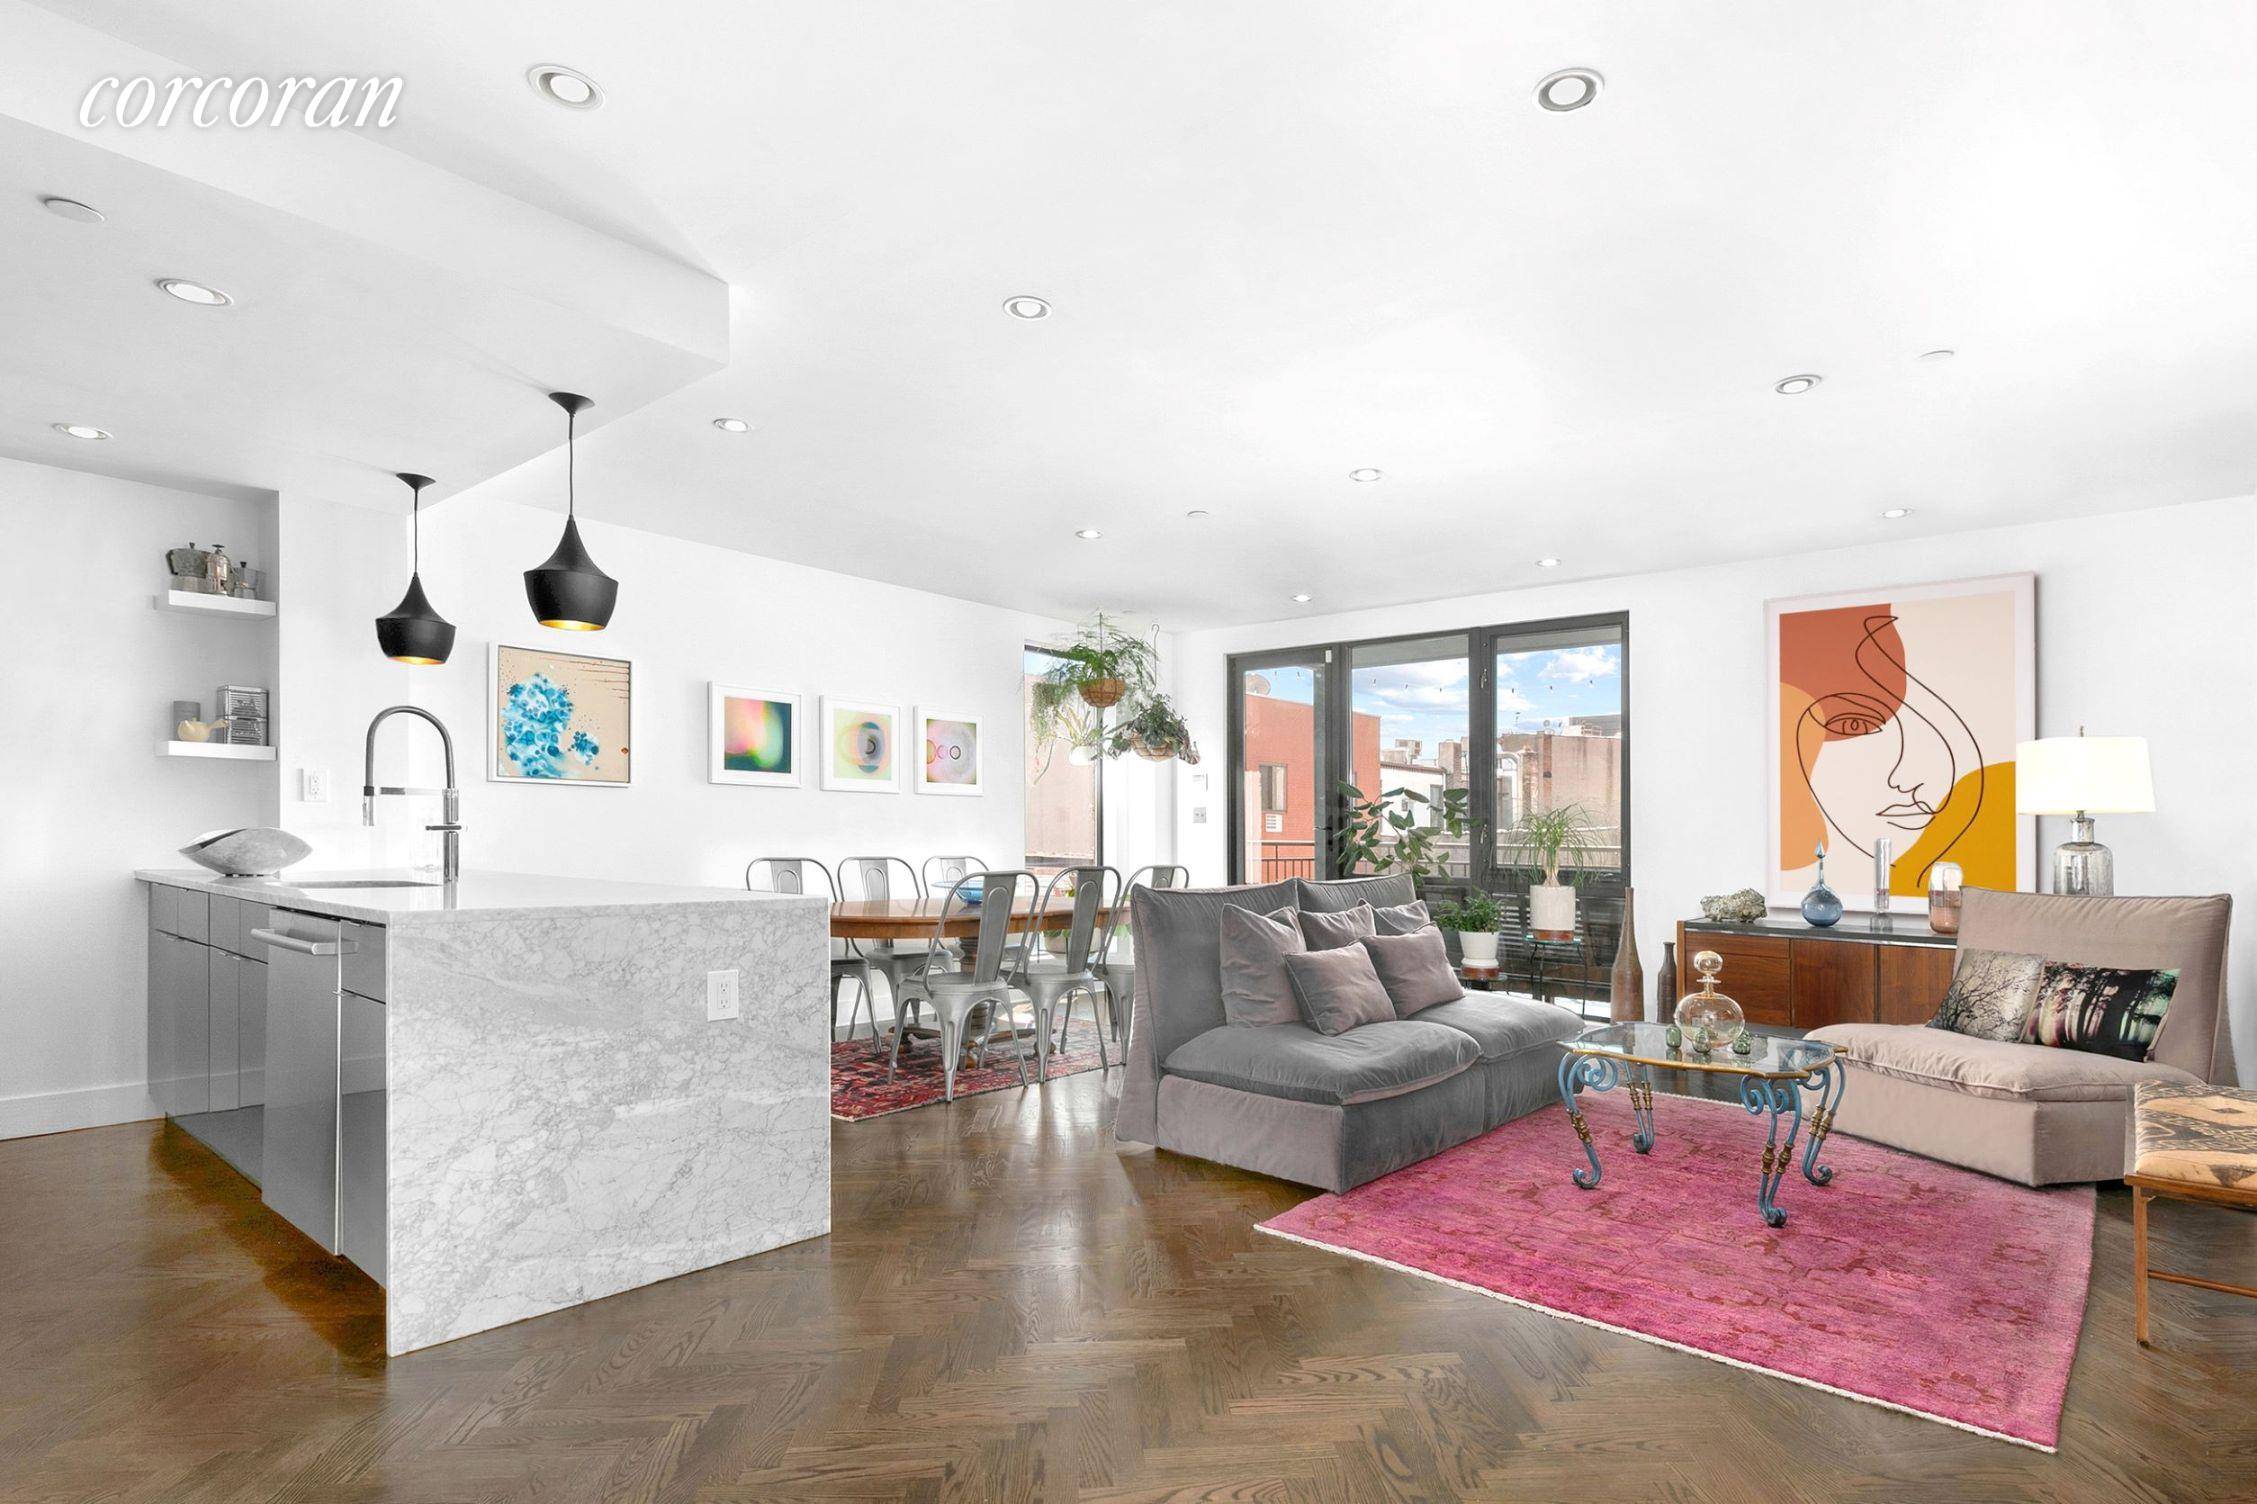 Welcome to 245 Manhattan Avenue 3B, an expansive two bedroom, two bath condo spanning half of a floor of a chic boutique elevator building in prime Williamsburg.